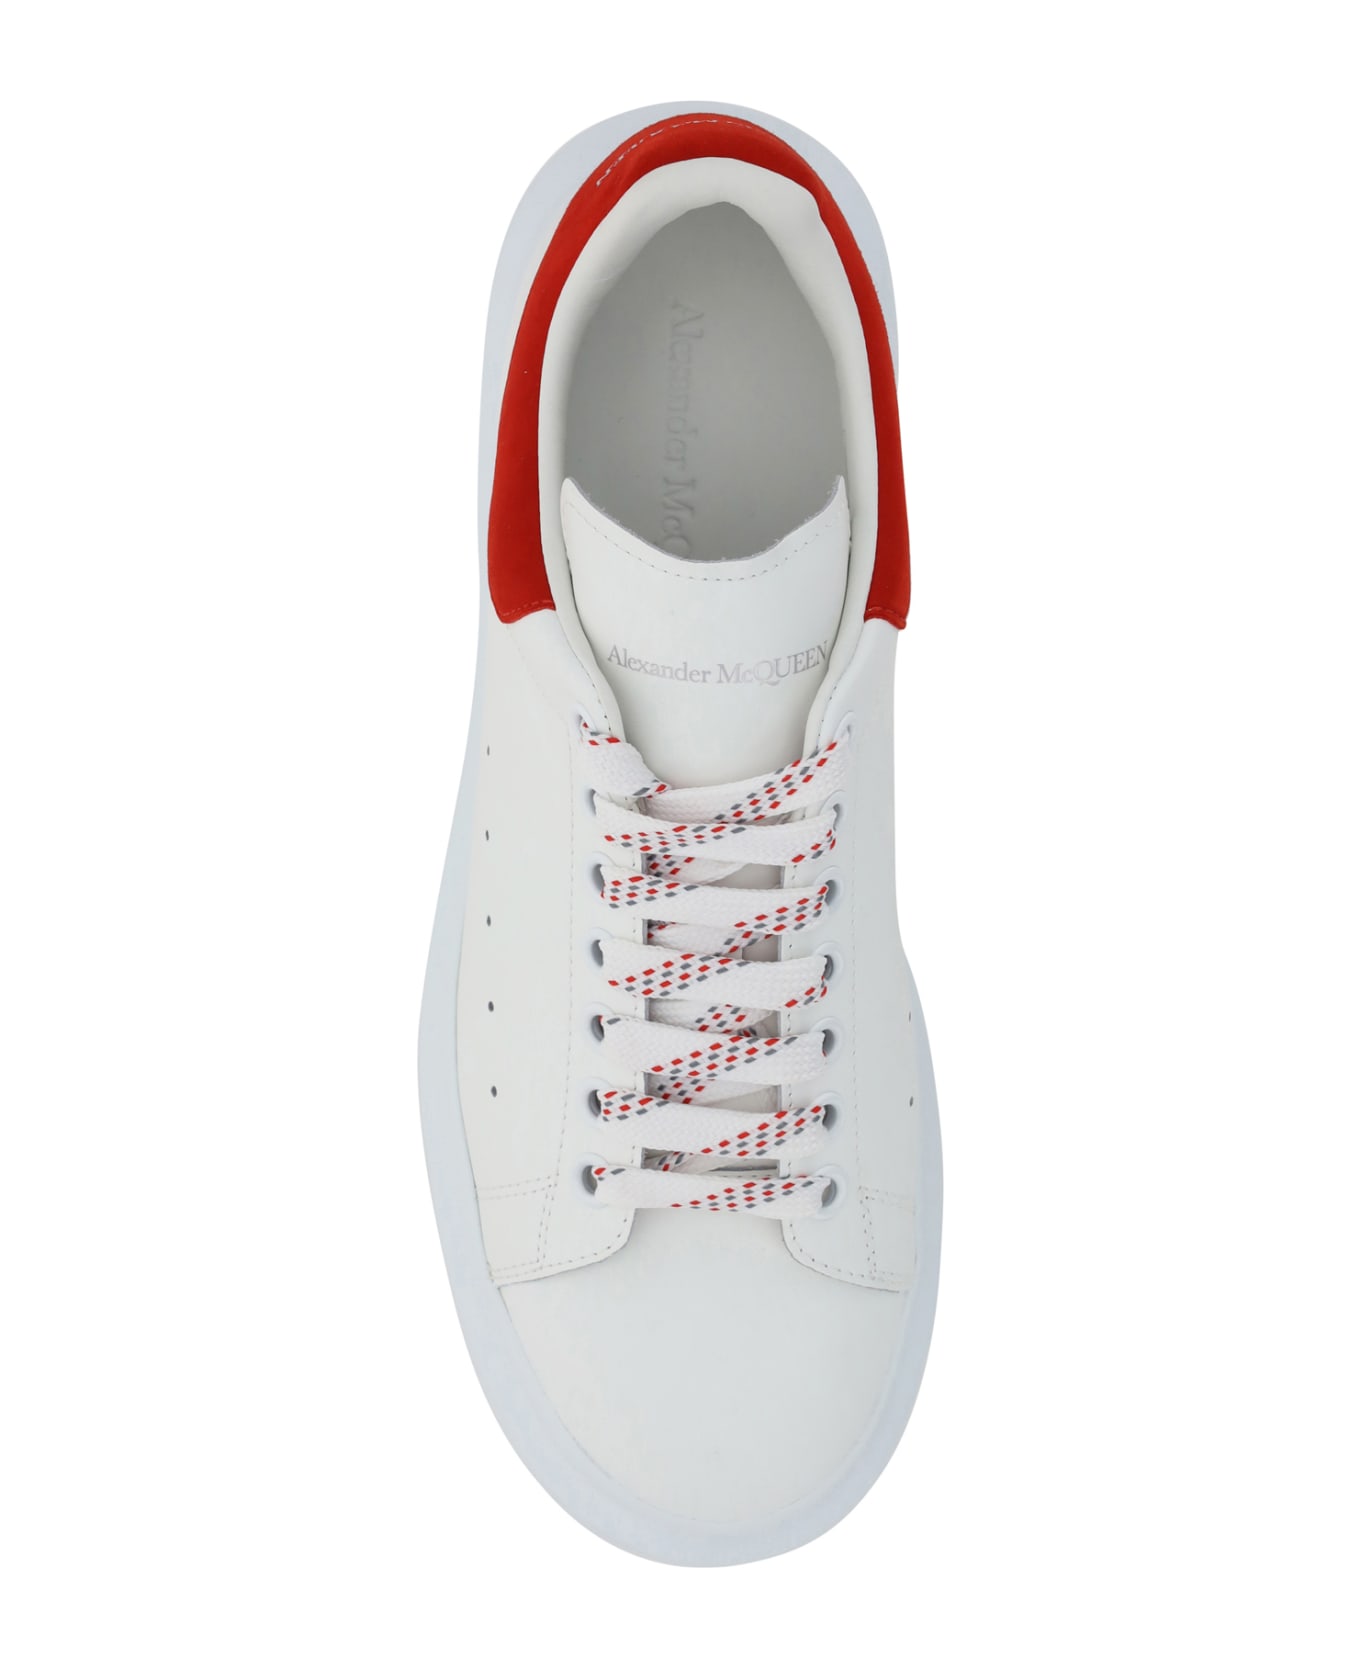 Alexander McQueen Sneakers - White/lust Red